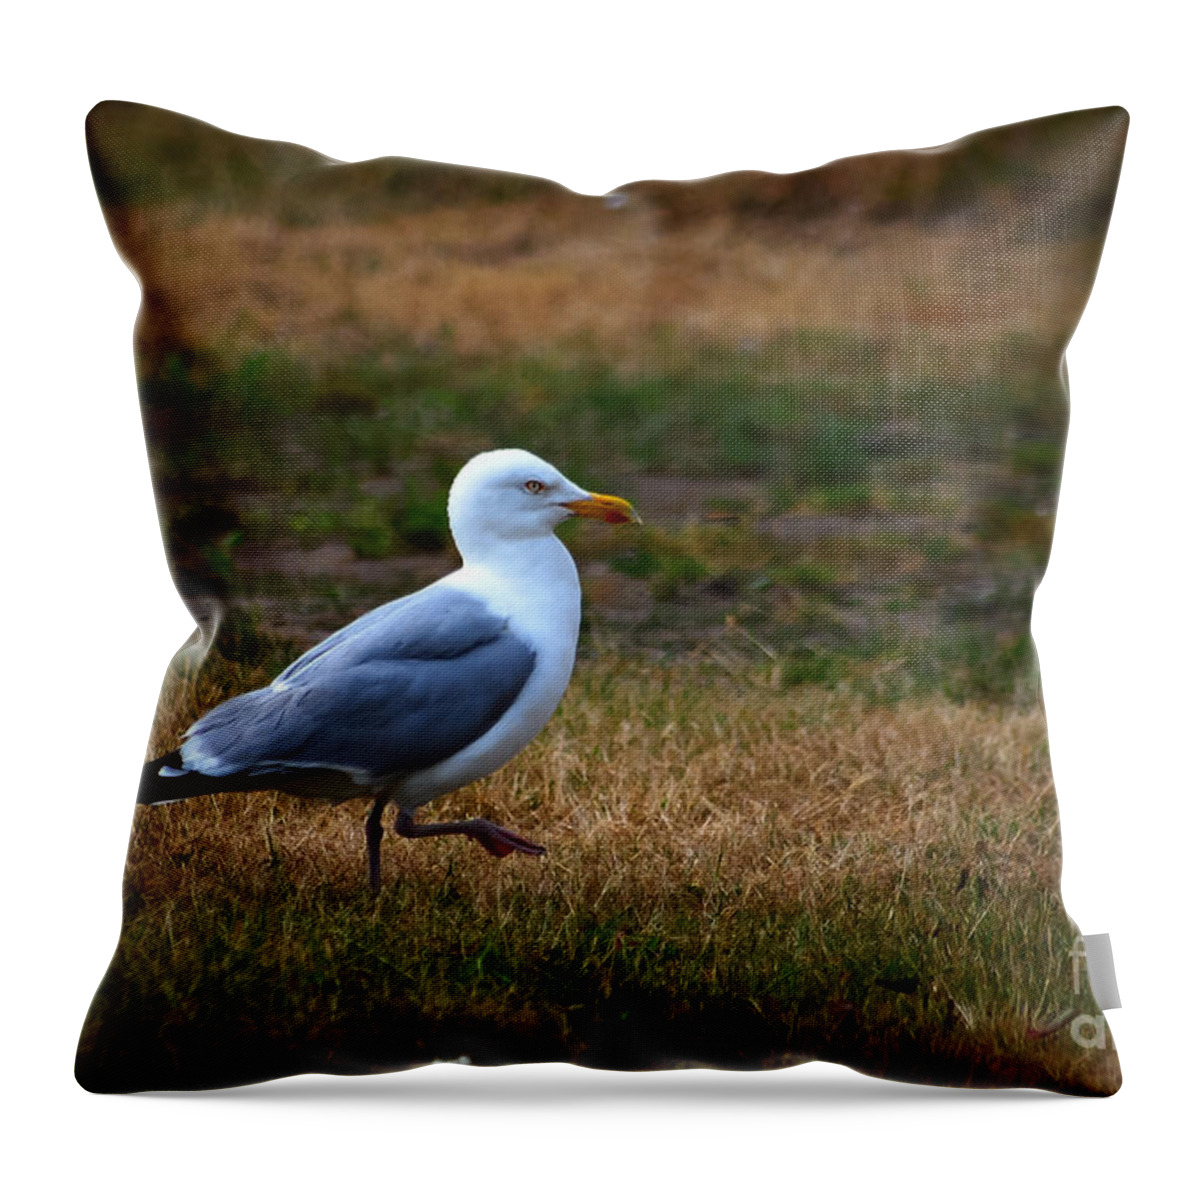 Bird Throw Pillow featuring the photograph Take Walk by Hannes Cmarits